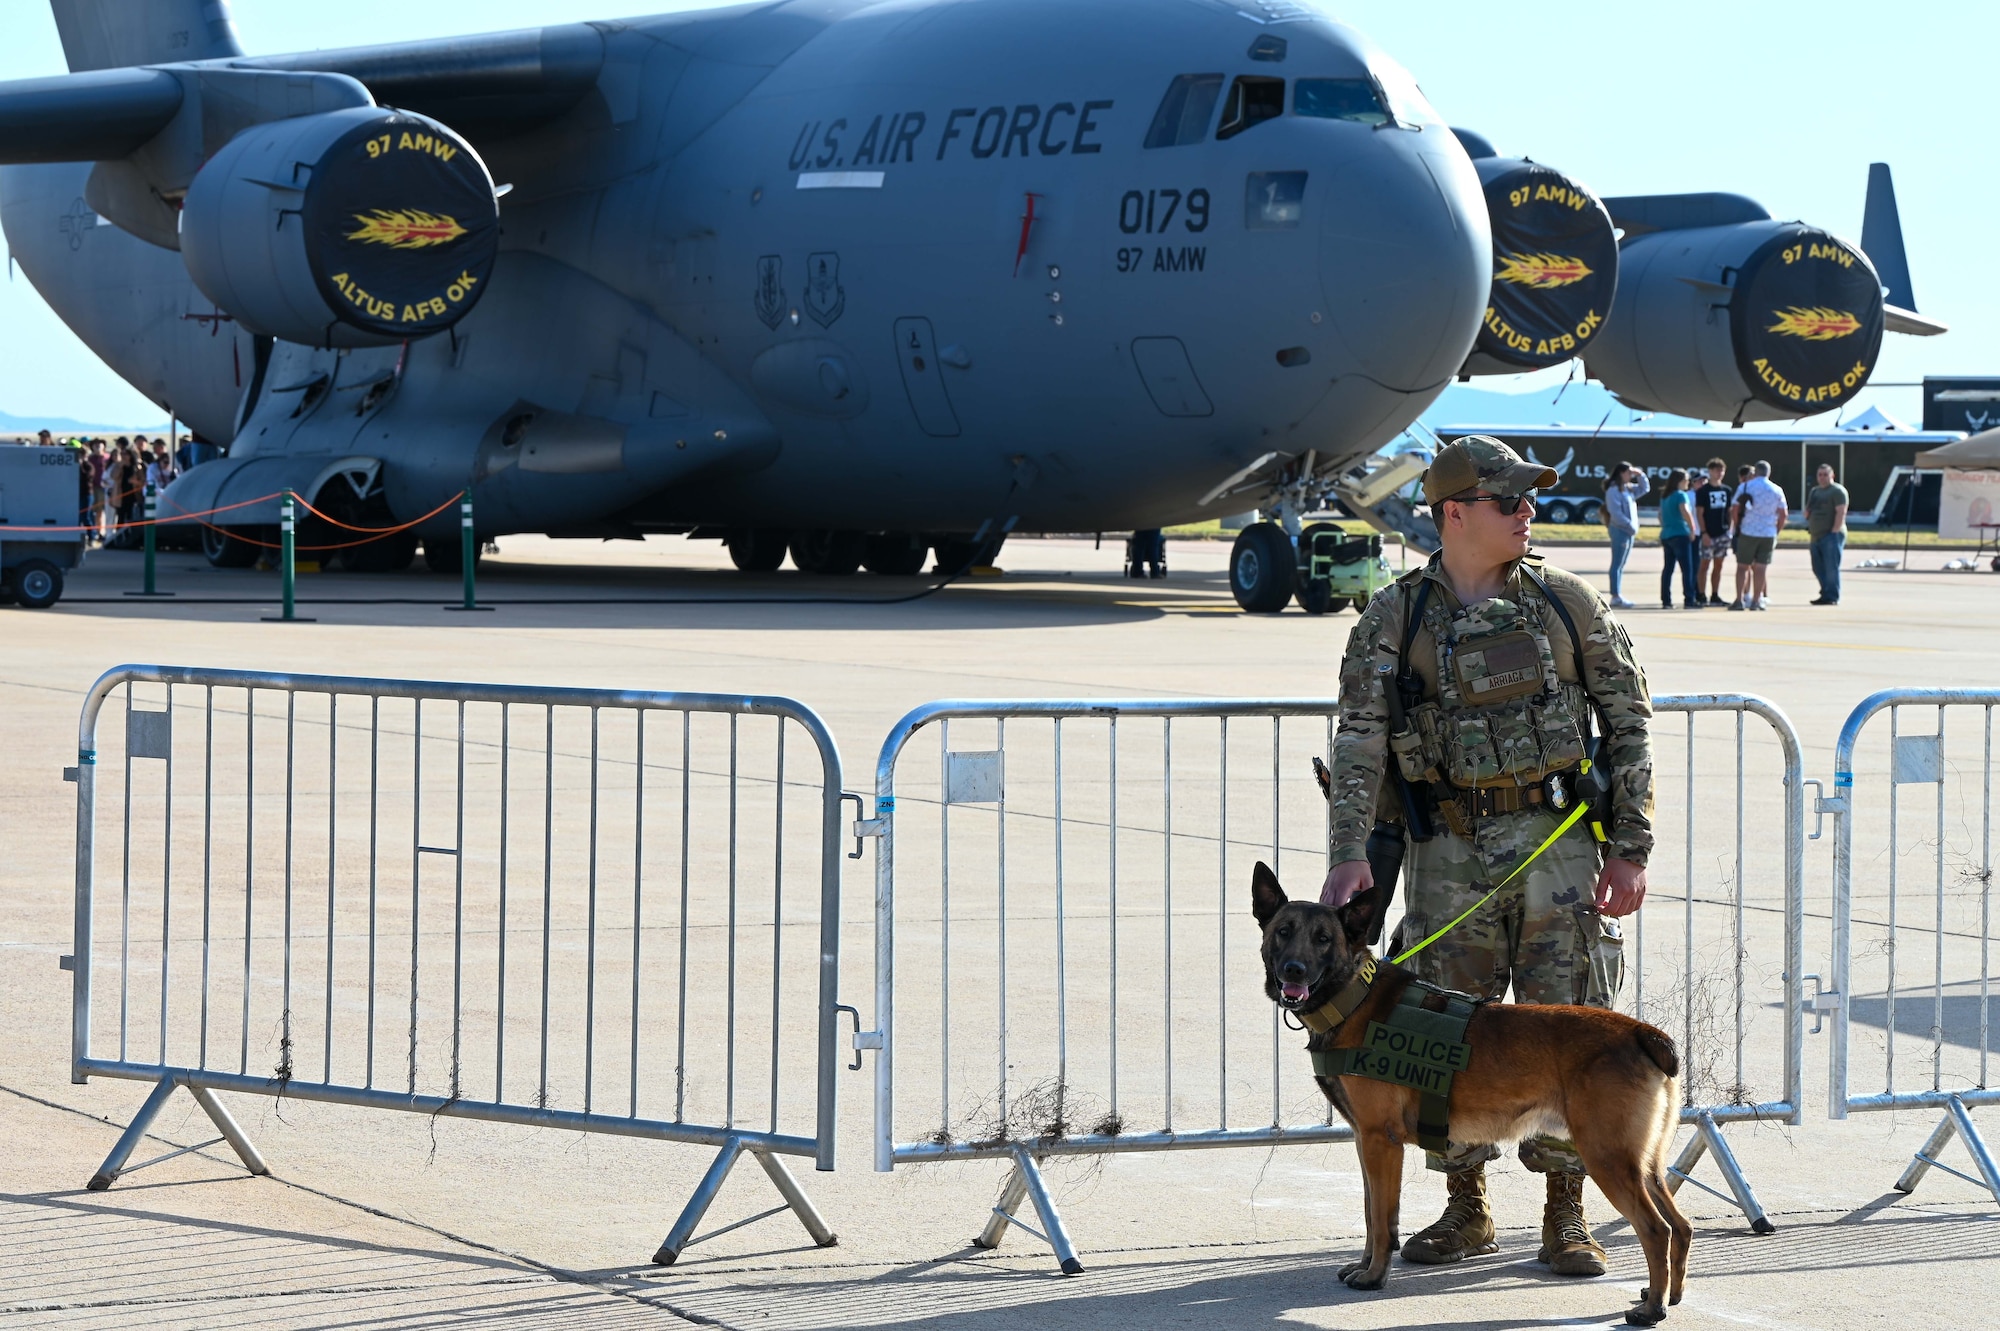 Airman 1st Class Patrick Arriaga, 97th Security Forces (SFS) military working dog (MWD) handler, and Biko, a MWD, patrol outside of the Red River Thunder airshow, at Altus Air Force Base, Oklahoma, Oct. 1, 2022. Defenders from the 97th SFS patrolled, searched and screened more than 20,000 airshow attendees. (U.S. Air Force photo by Senior Airman Kayla Christenson)